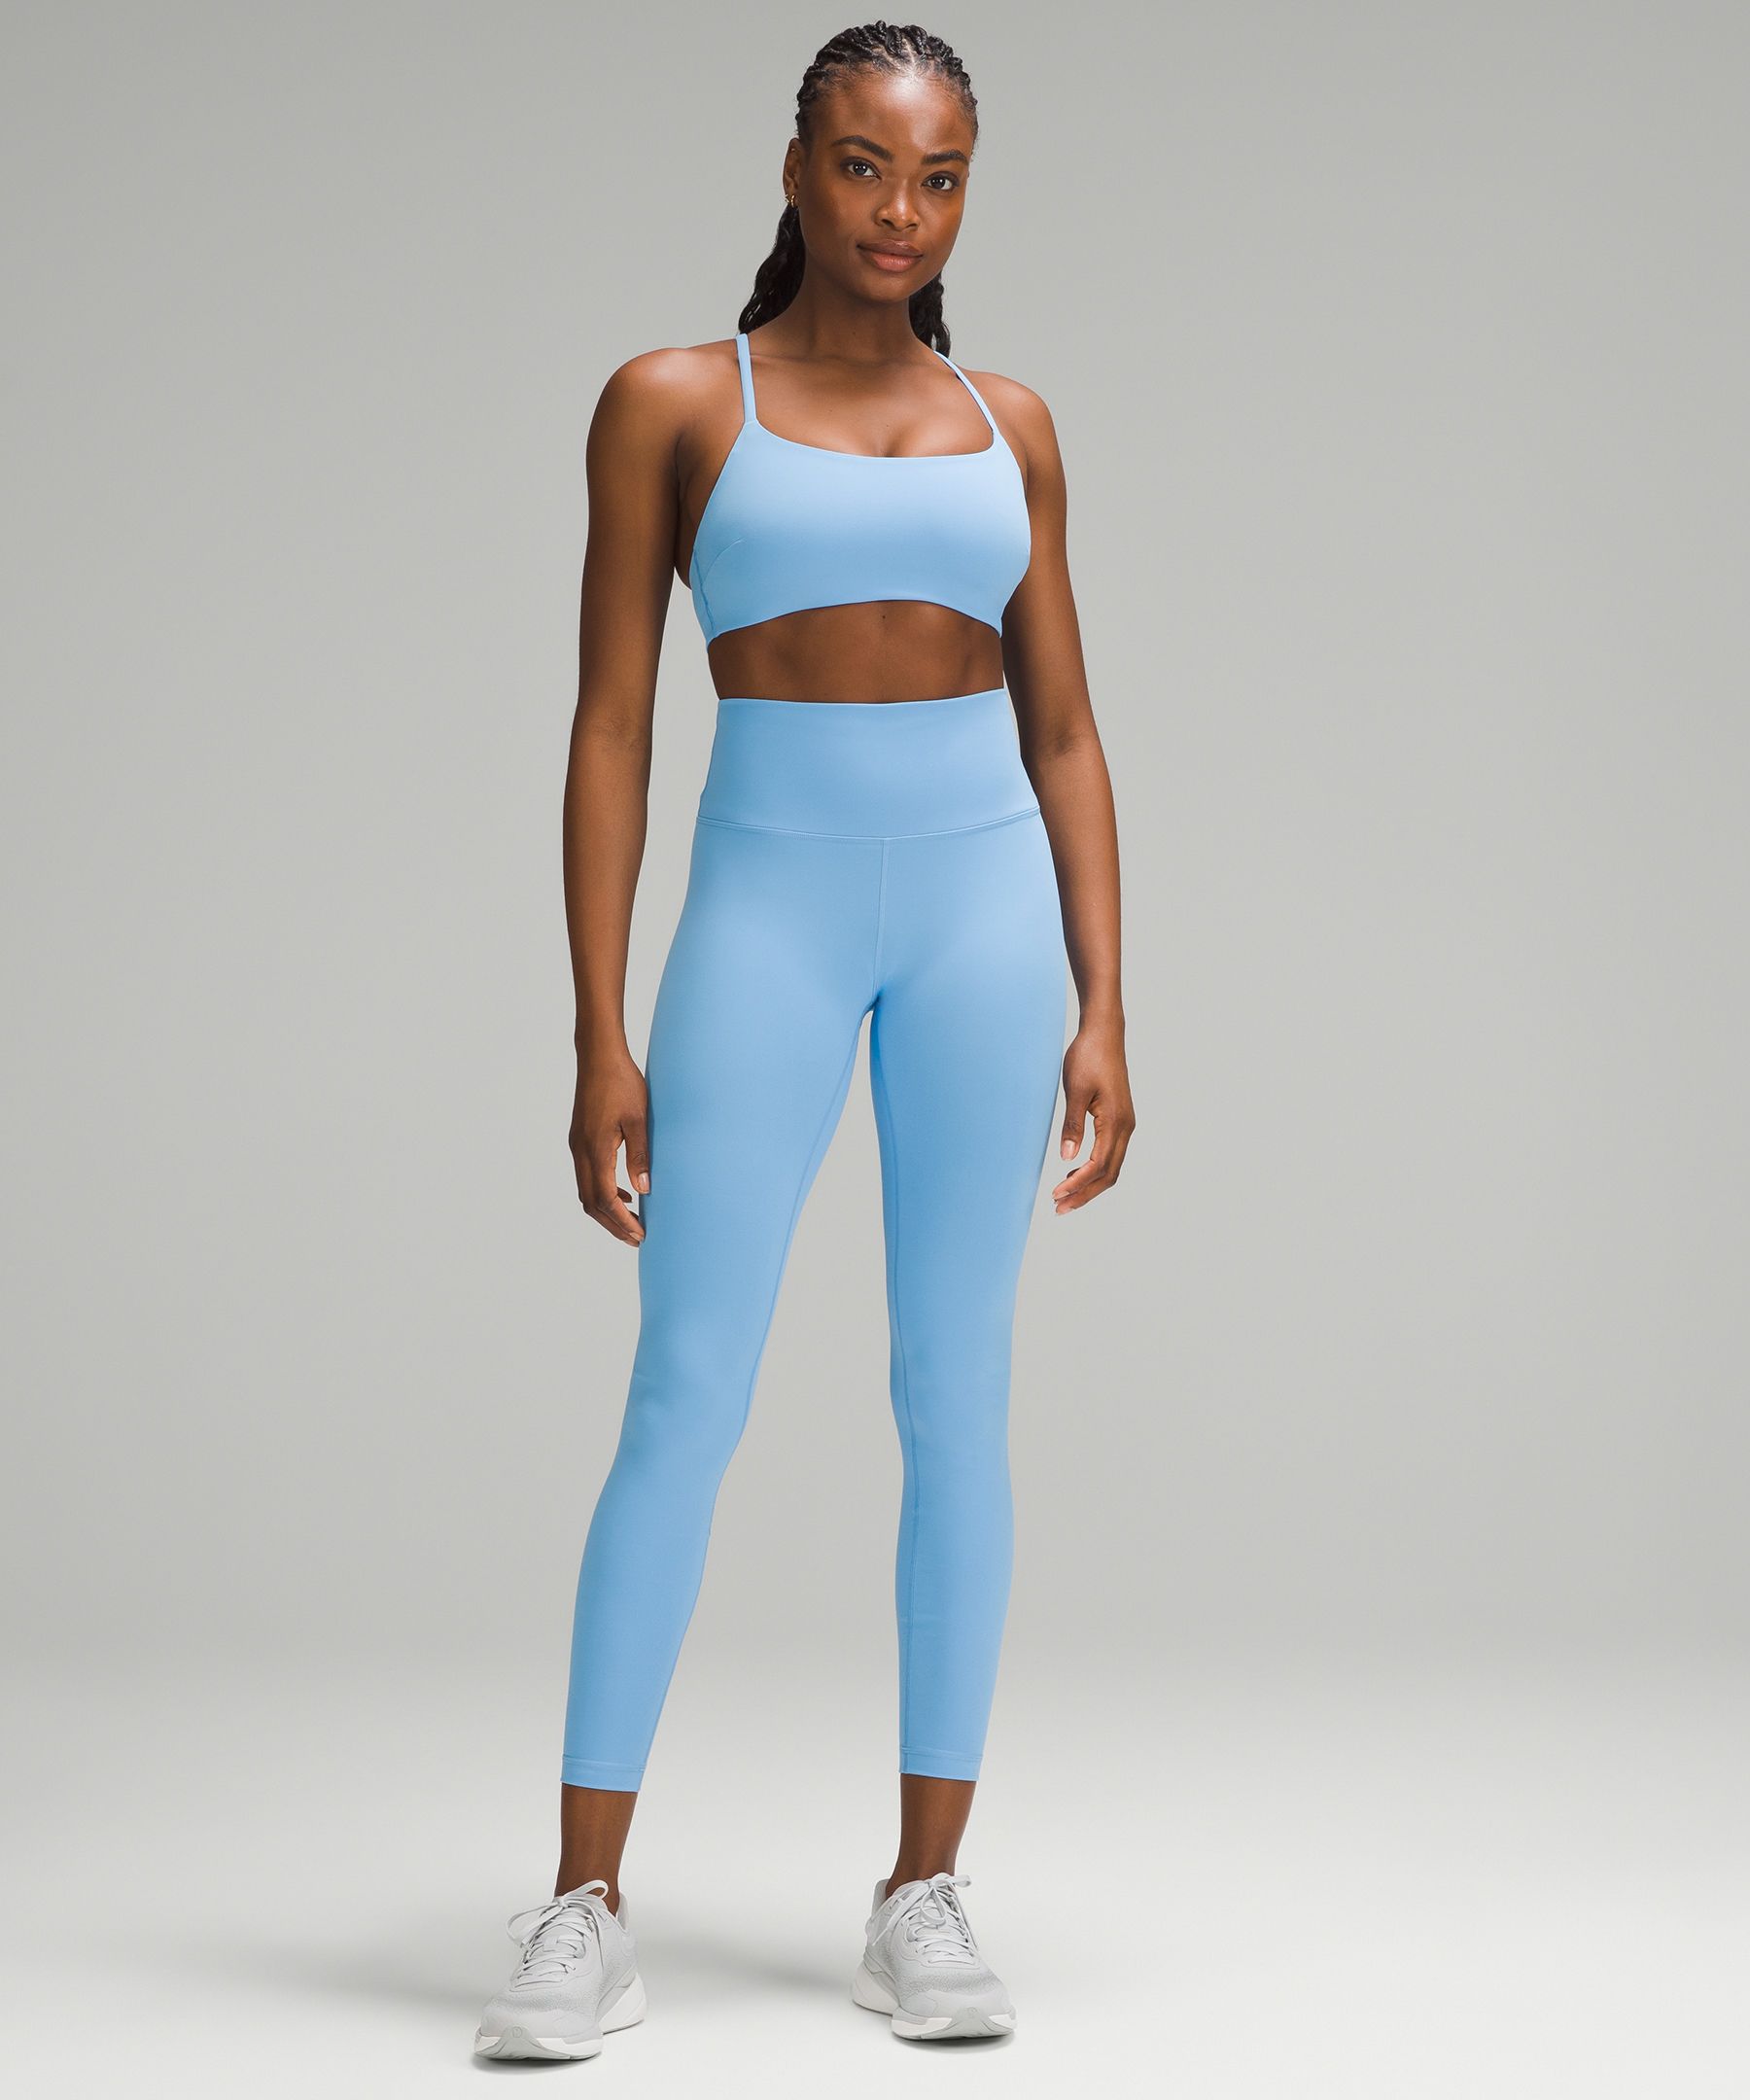 I want more blues in my life! Flow y bra in chambray, wunder train